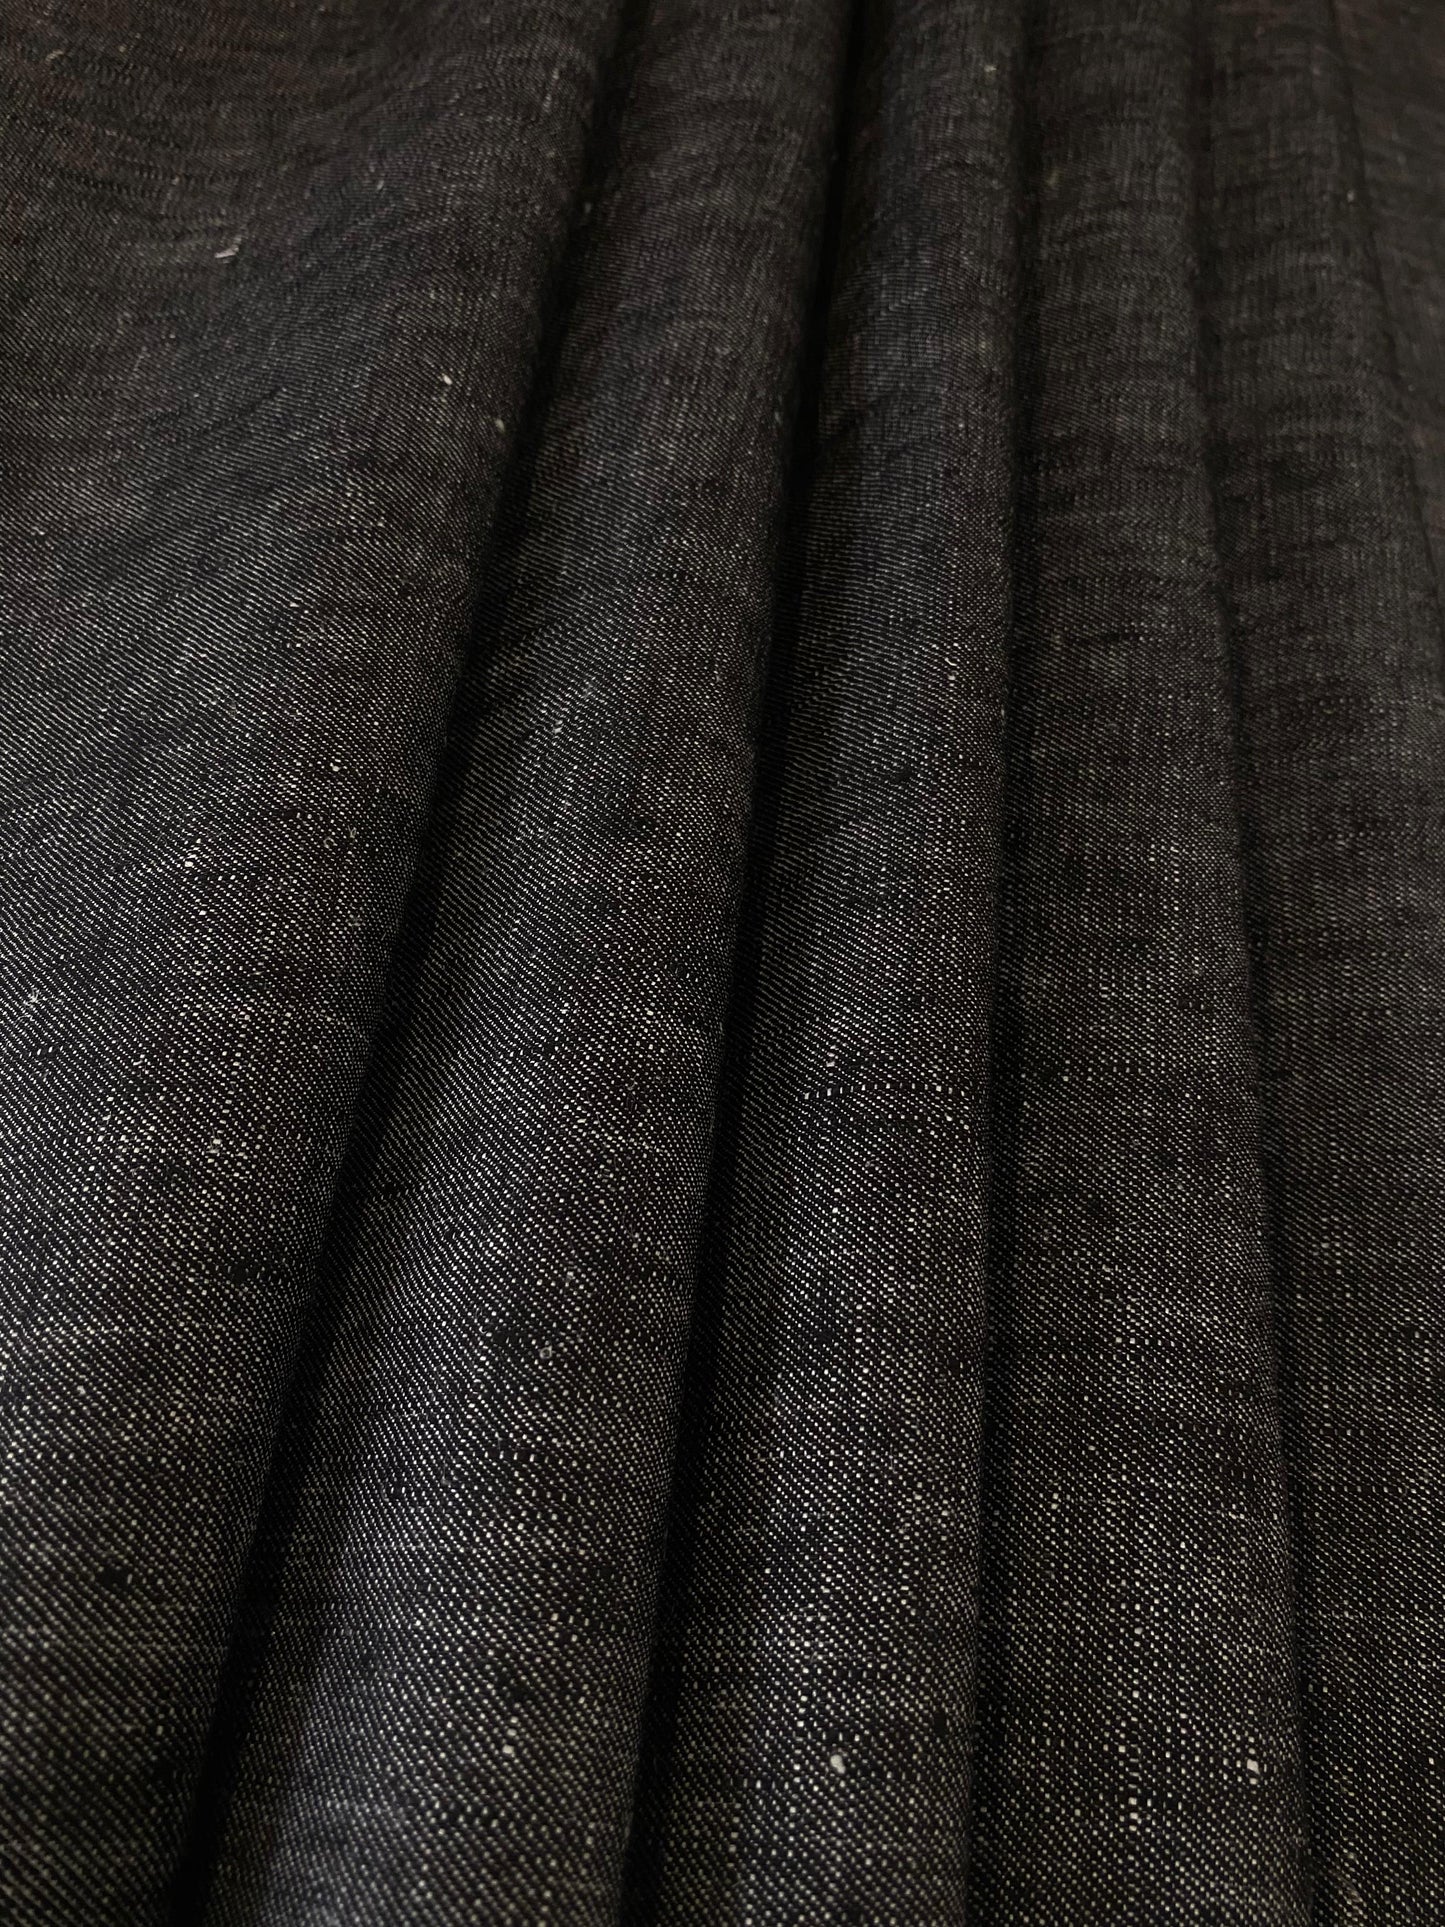 Black Grey Linen Suiting- Premium Dyed Linen Fabric LL-007